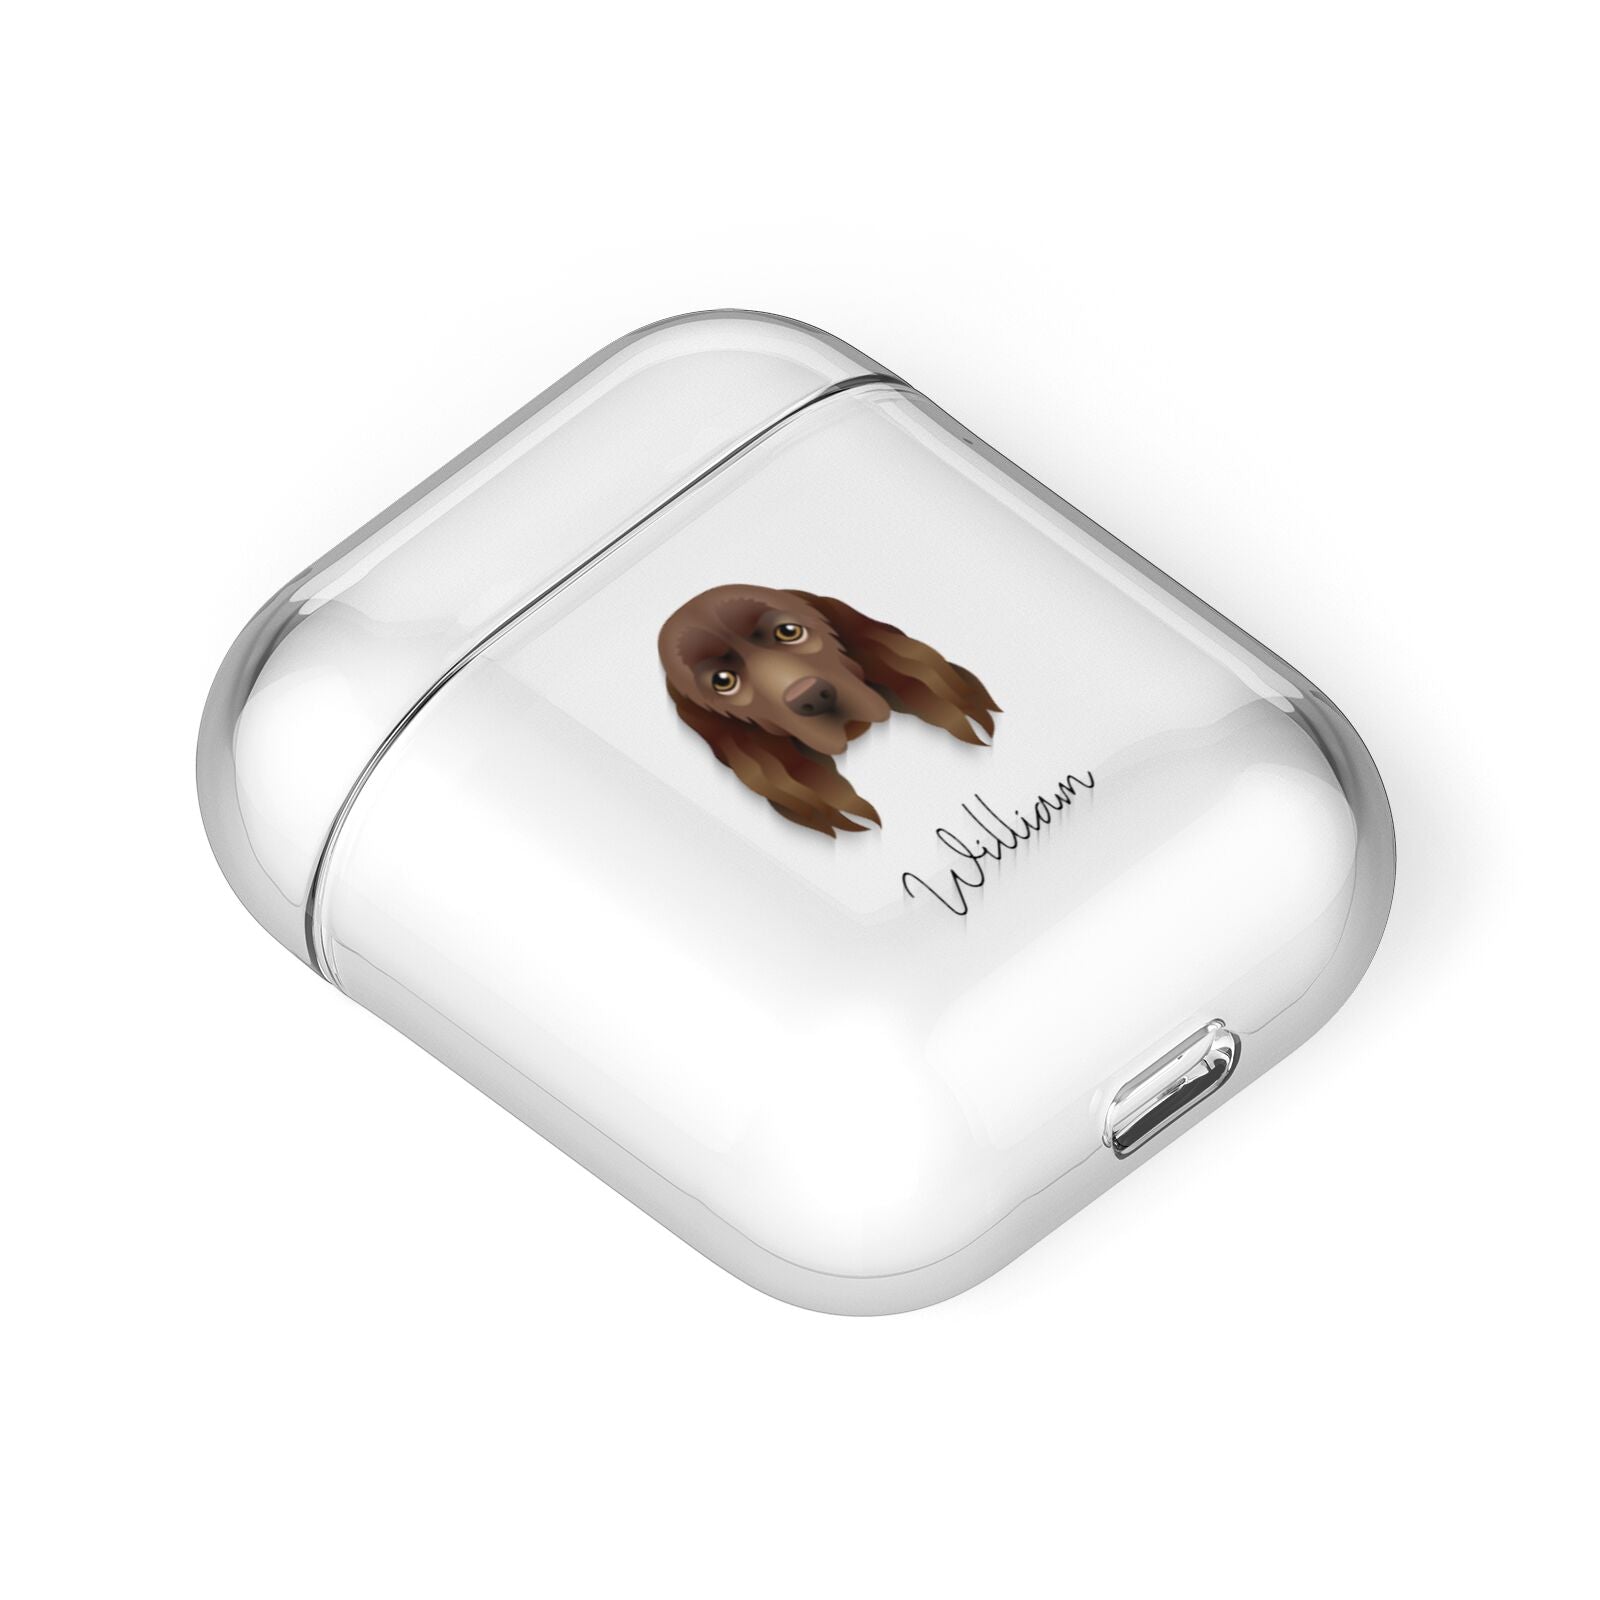 Sussex Spaniel Personalised AirPods Case Laid Flat